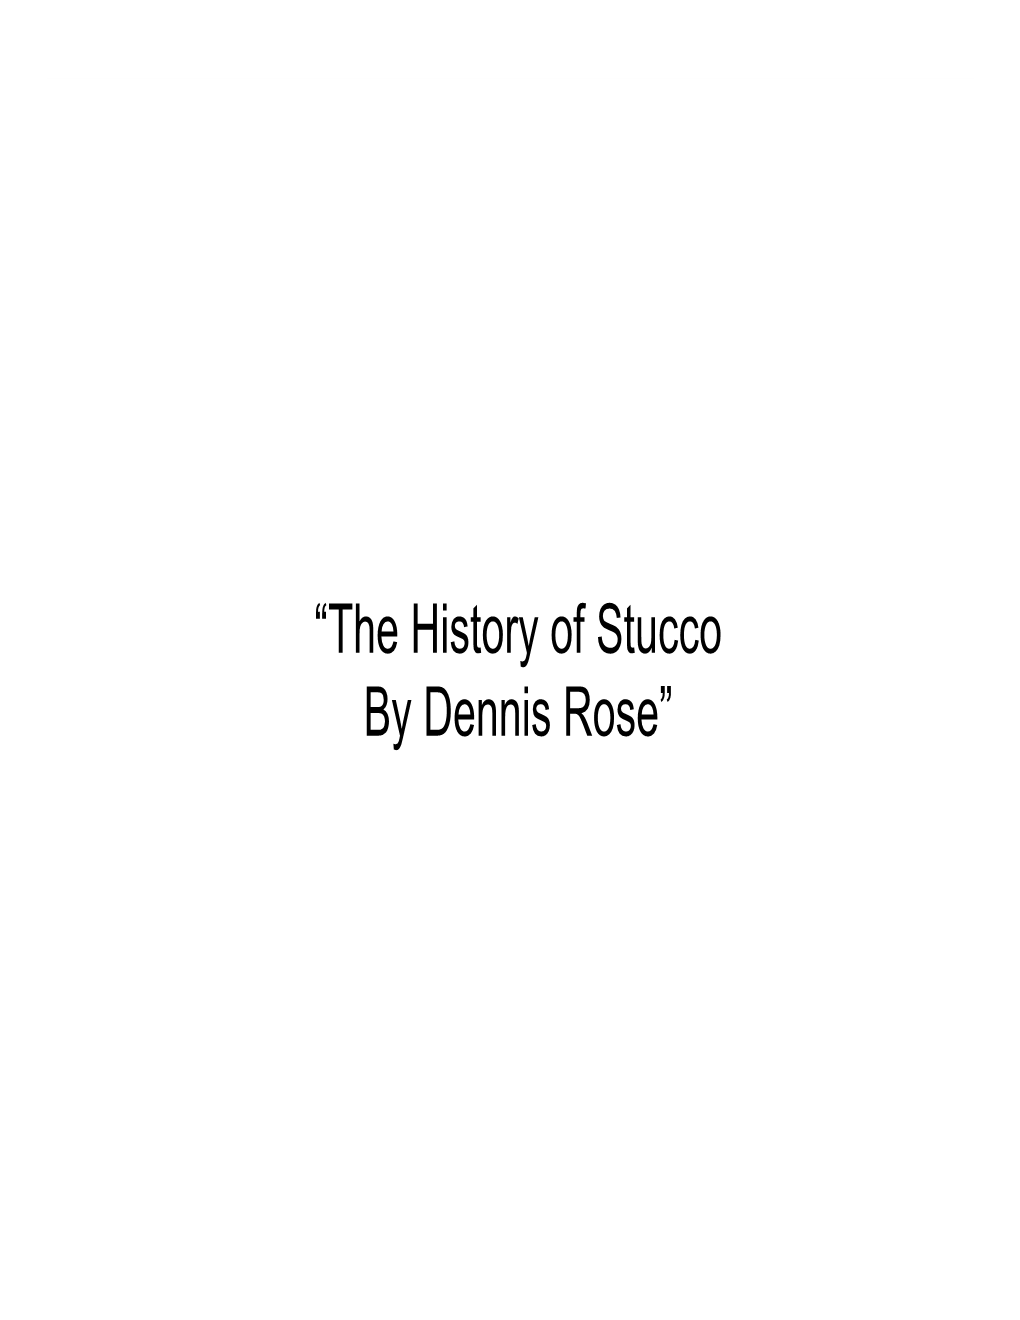 “The History of Stucco by Dennis Rose” Thethe Historyhistory Ofof Stuccostucco Fromfrom Ancientancient Timestimes